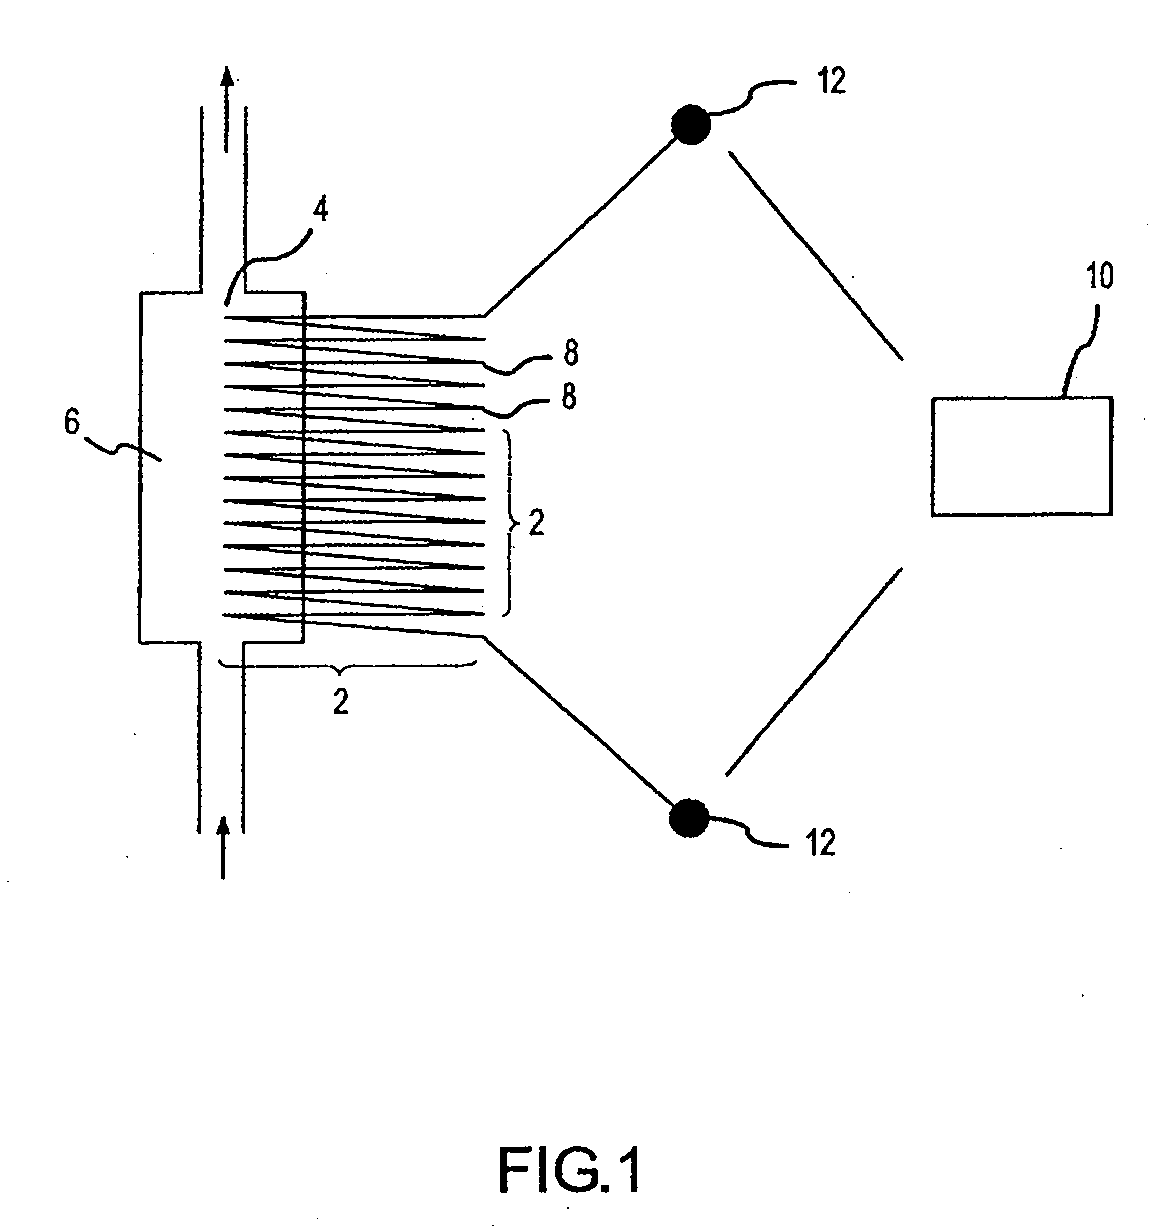 Method of Determining The Nucleotide Sequence of Oligonucleotides and DNA Molecules